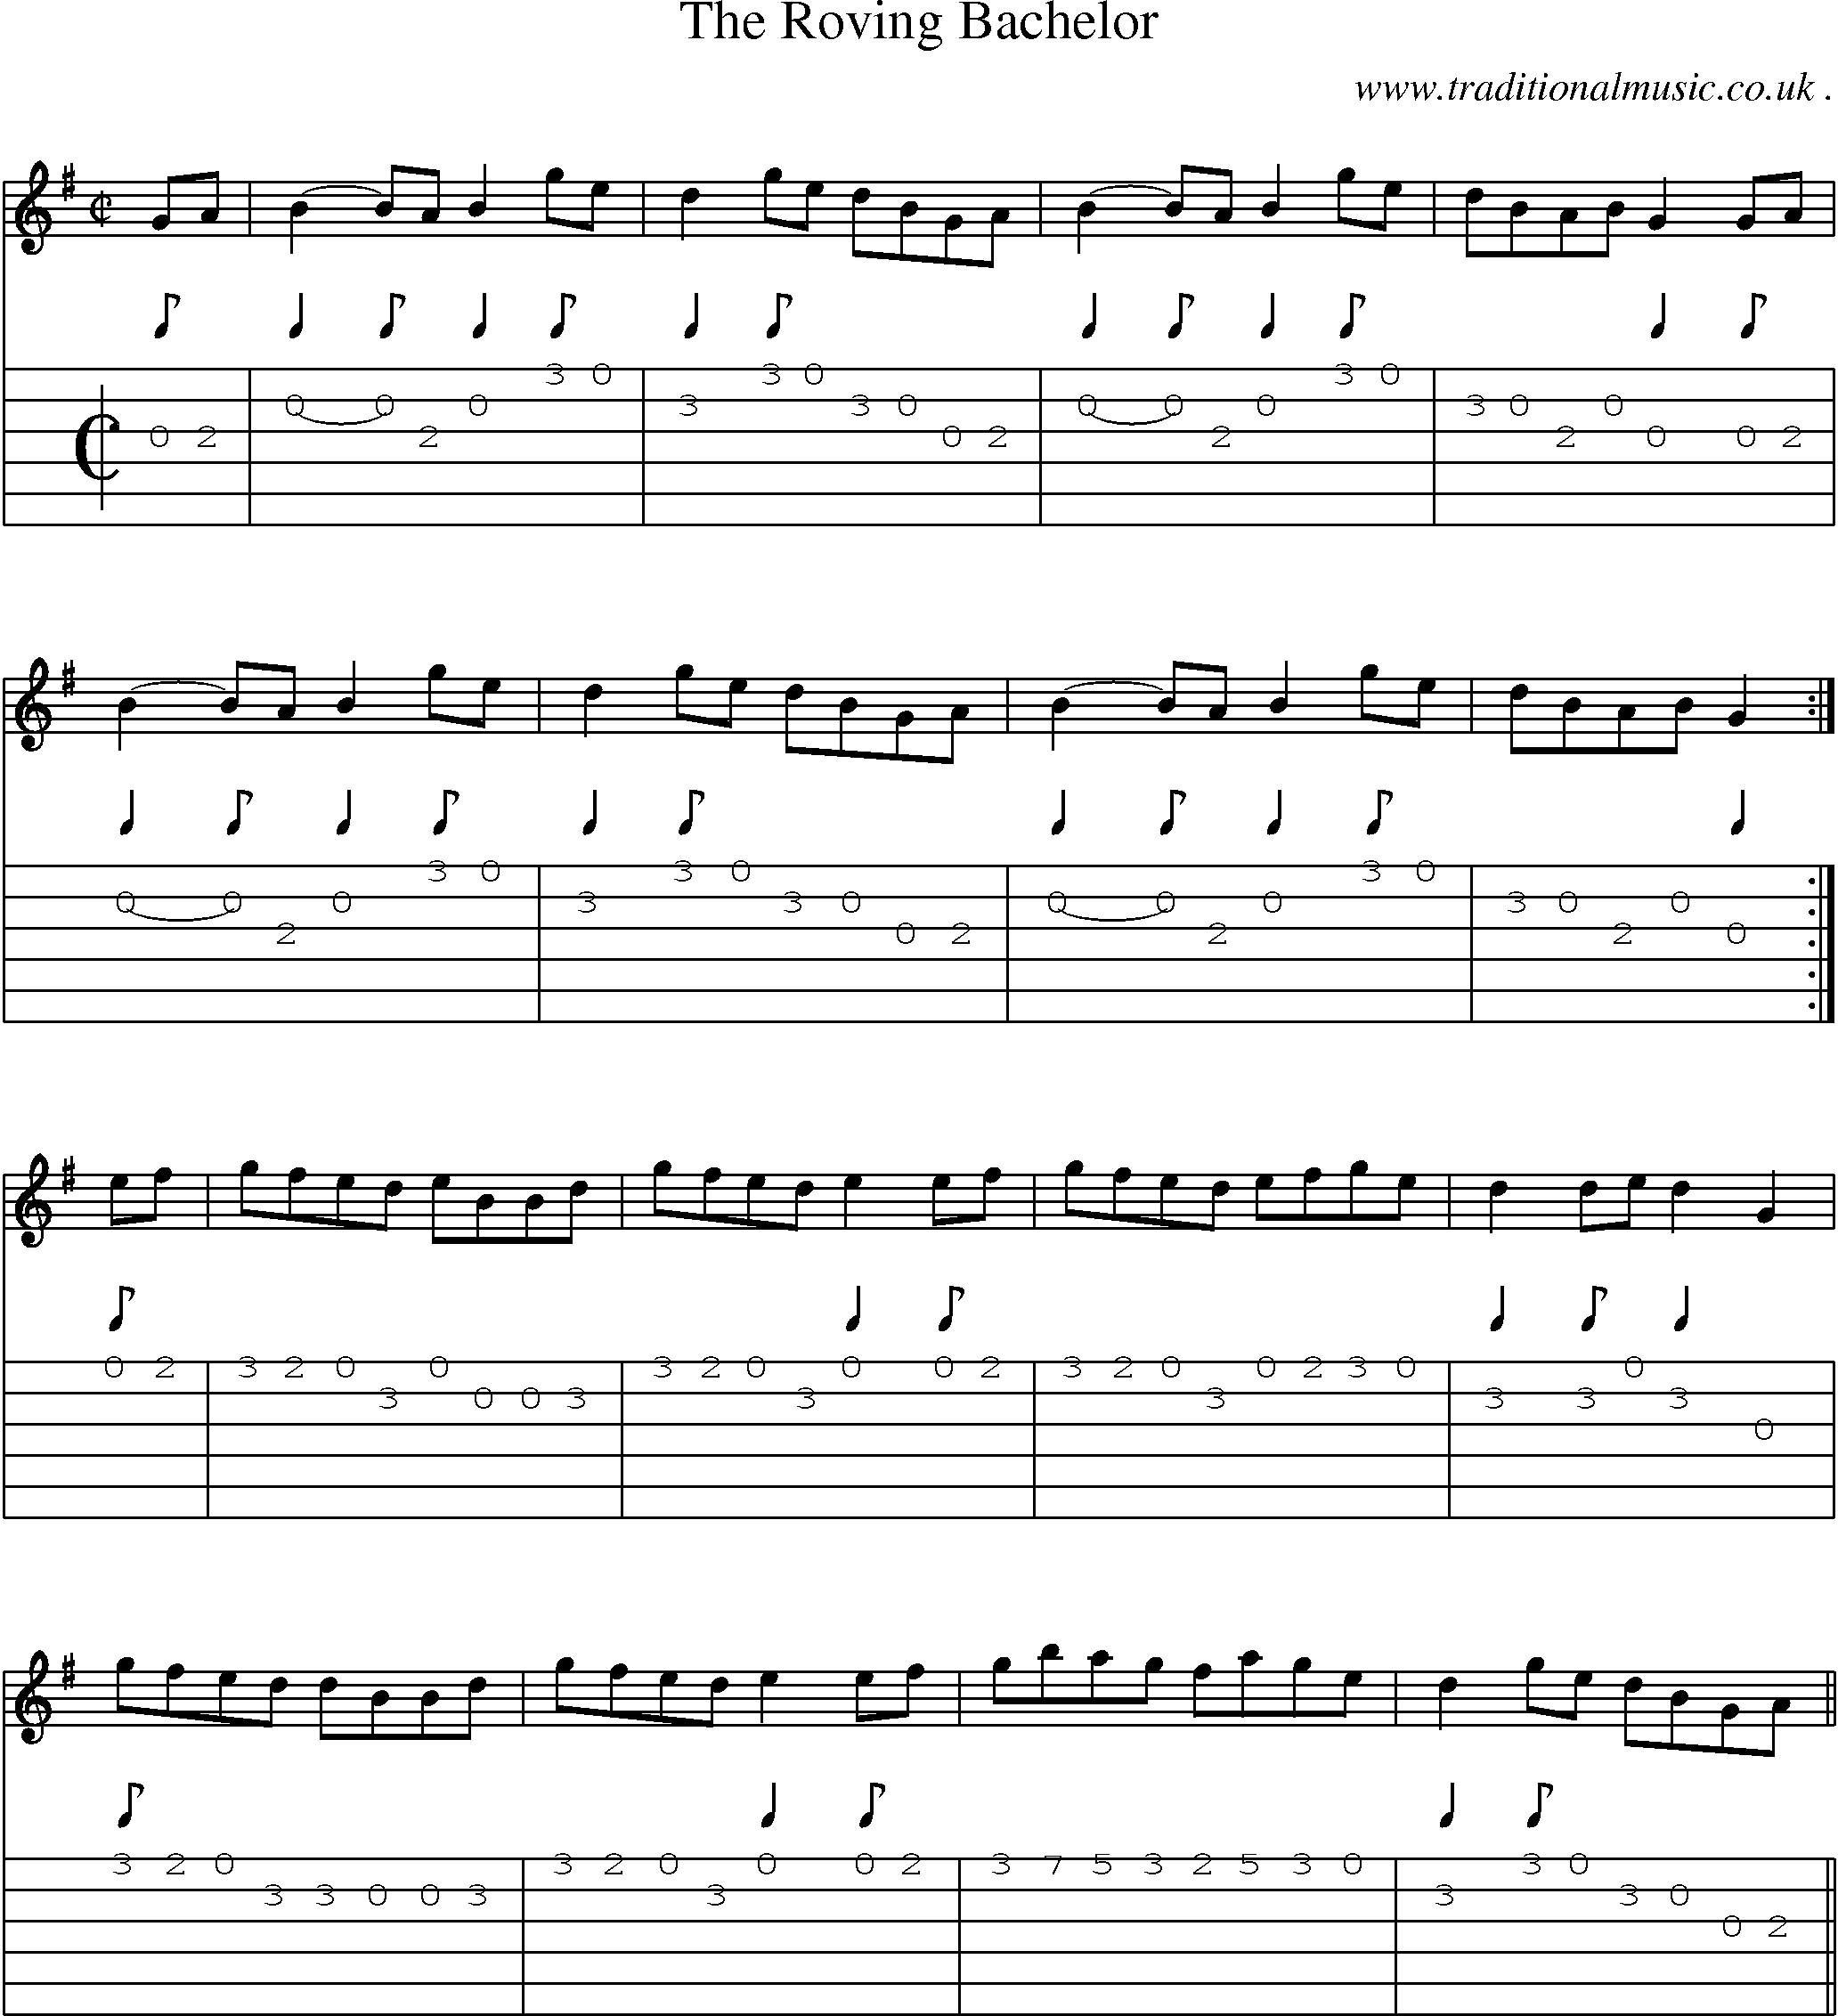 Sheet-Music and Guitar Tabs for The Roving Bachelor